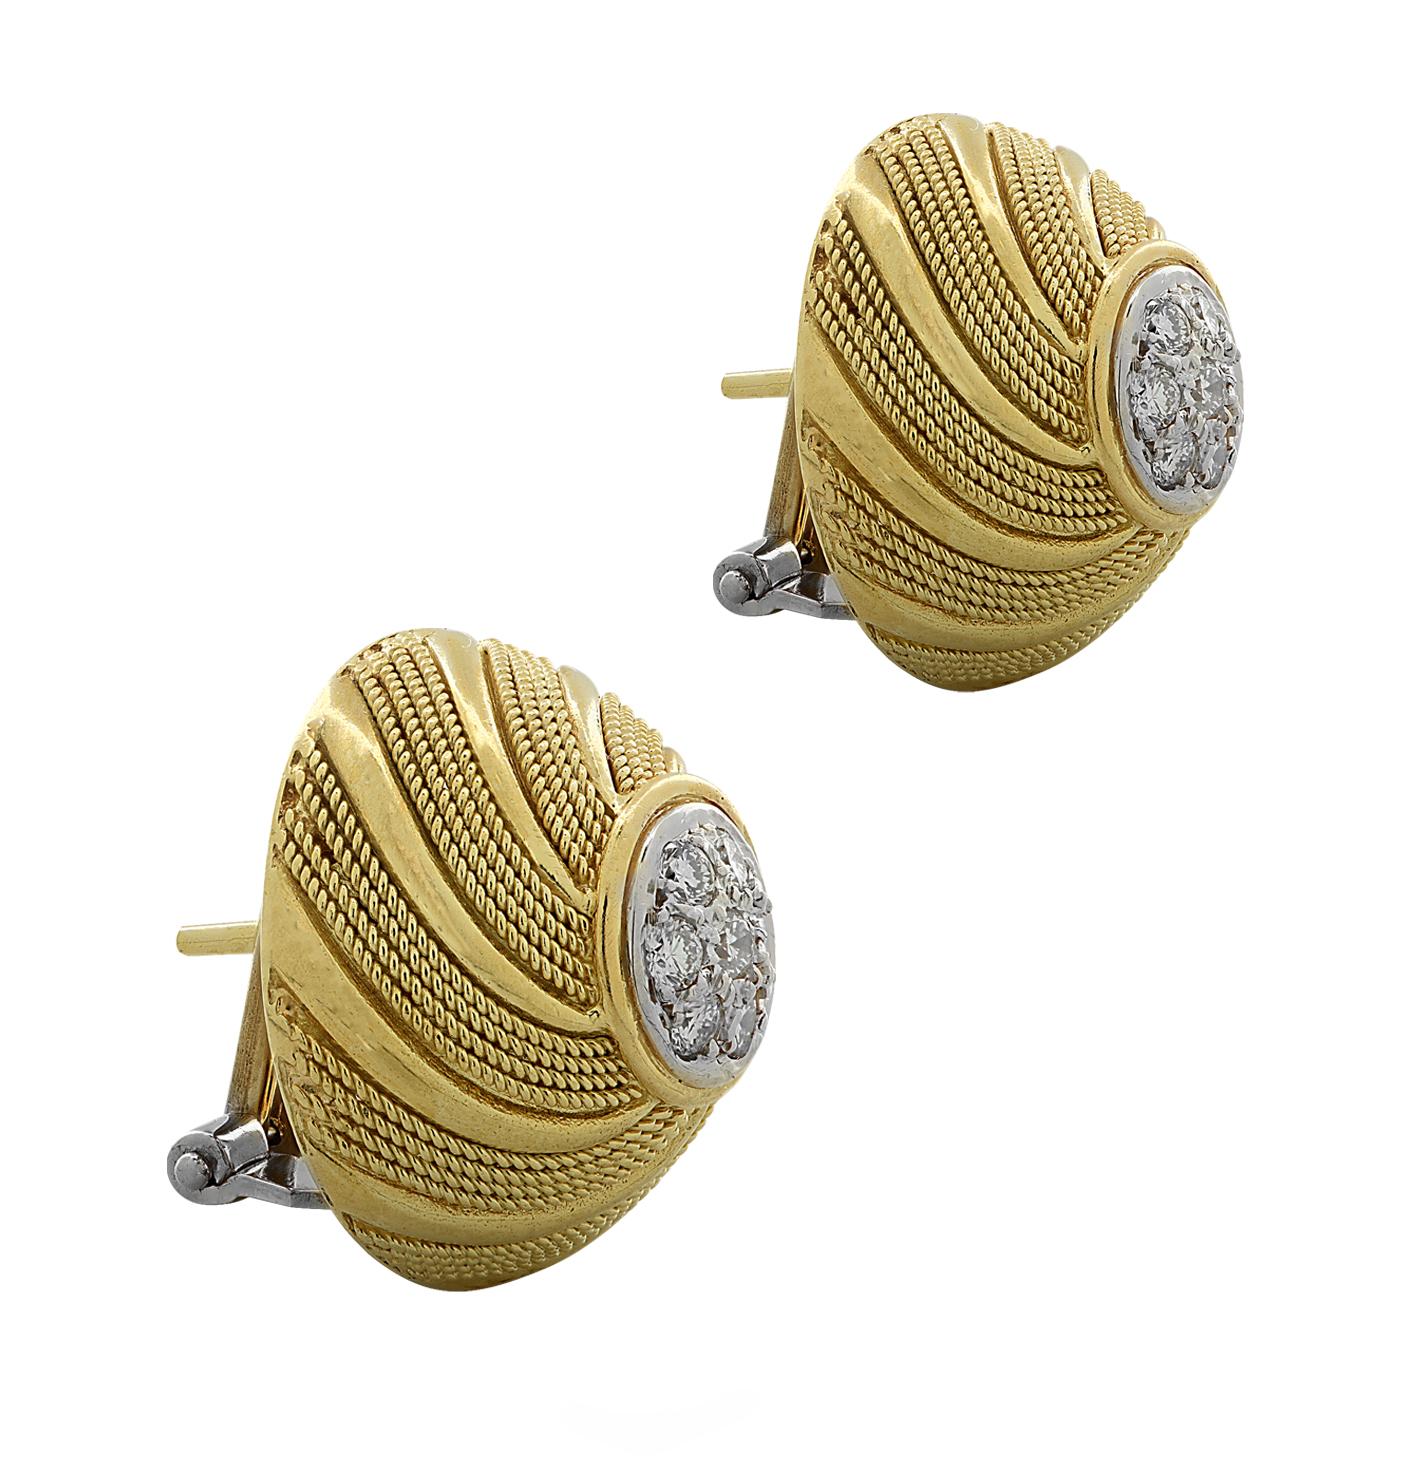 Striking stud earrings crafted in 18 karat yellow and white gold, featuring 14 round brilliant cut diamonds weighing approximately .50 carats total, G color, VS-SI clarity. The diamonds are arranged in a flower design and sit at the center of these